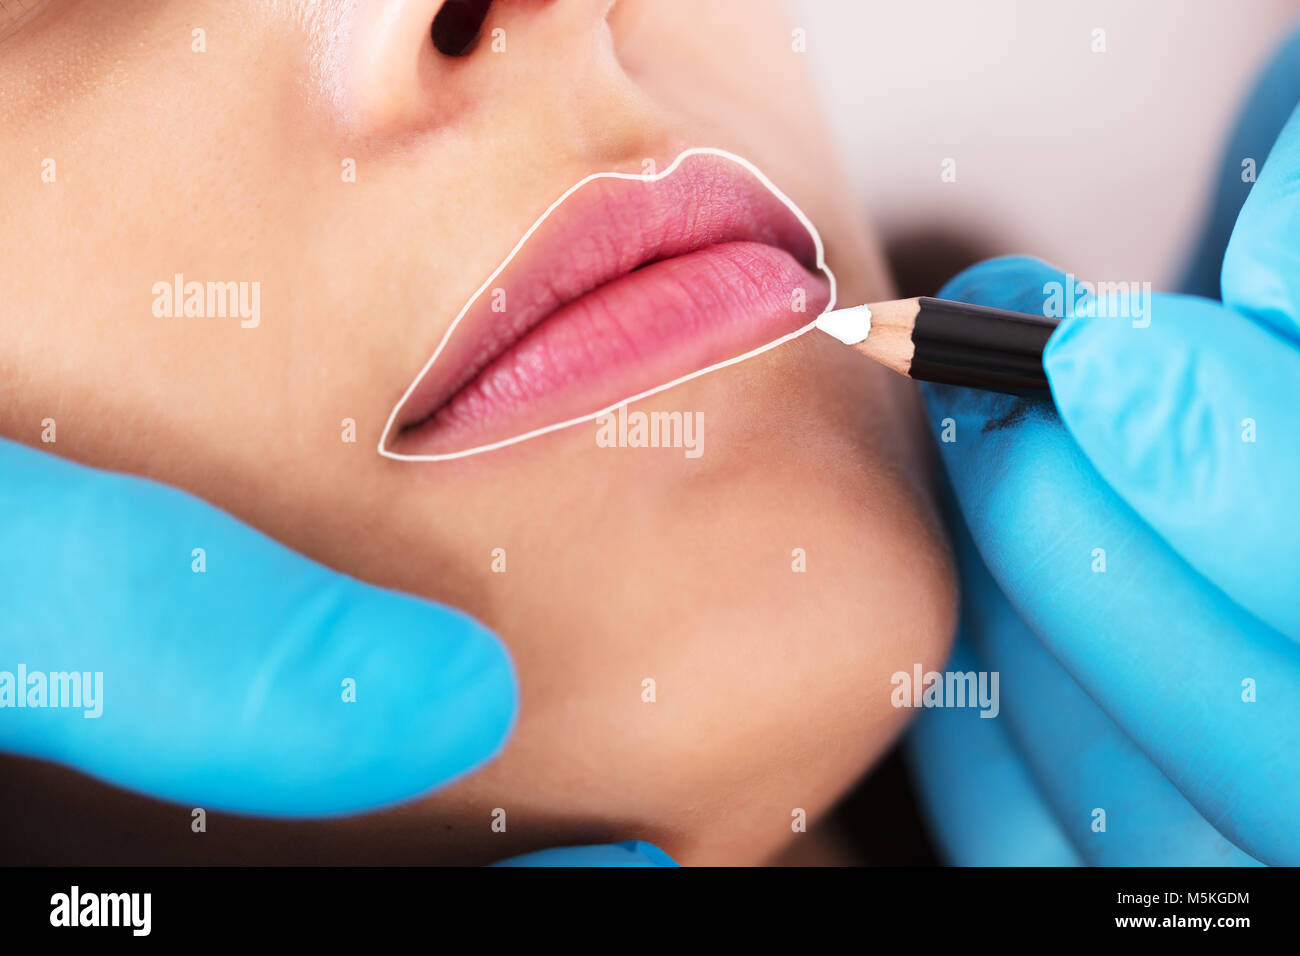 Cosmetologist Applying Permanent Make Up On Young Woman's Lips Stock Photo